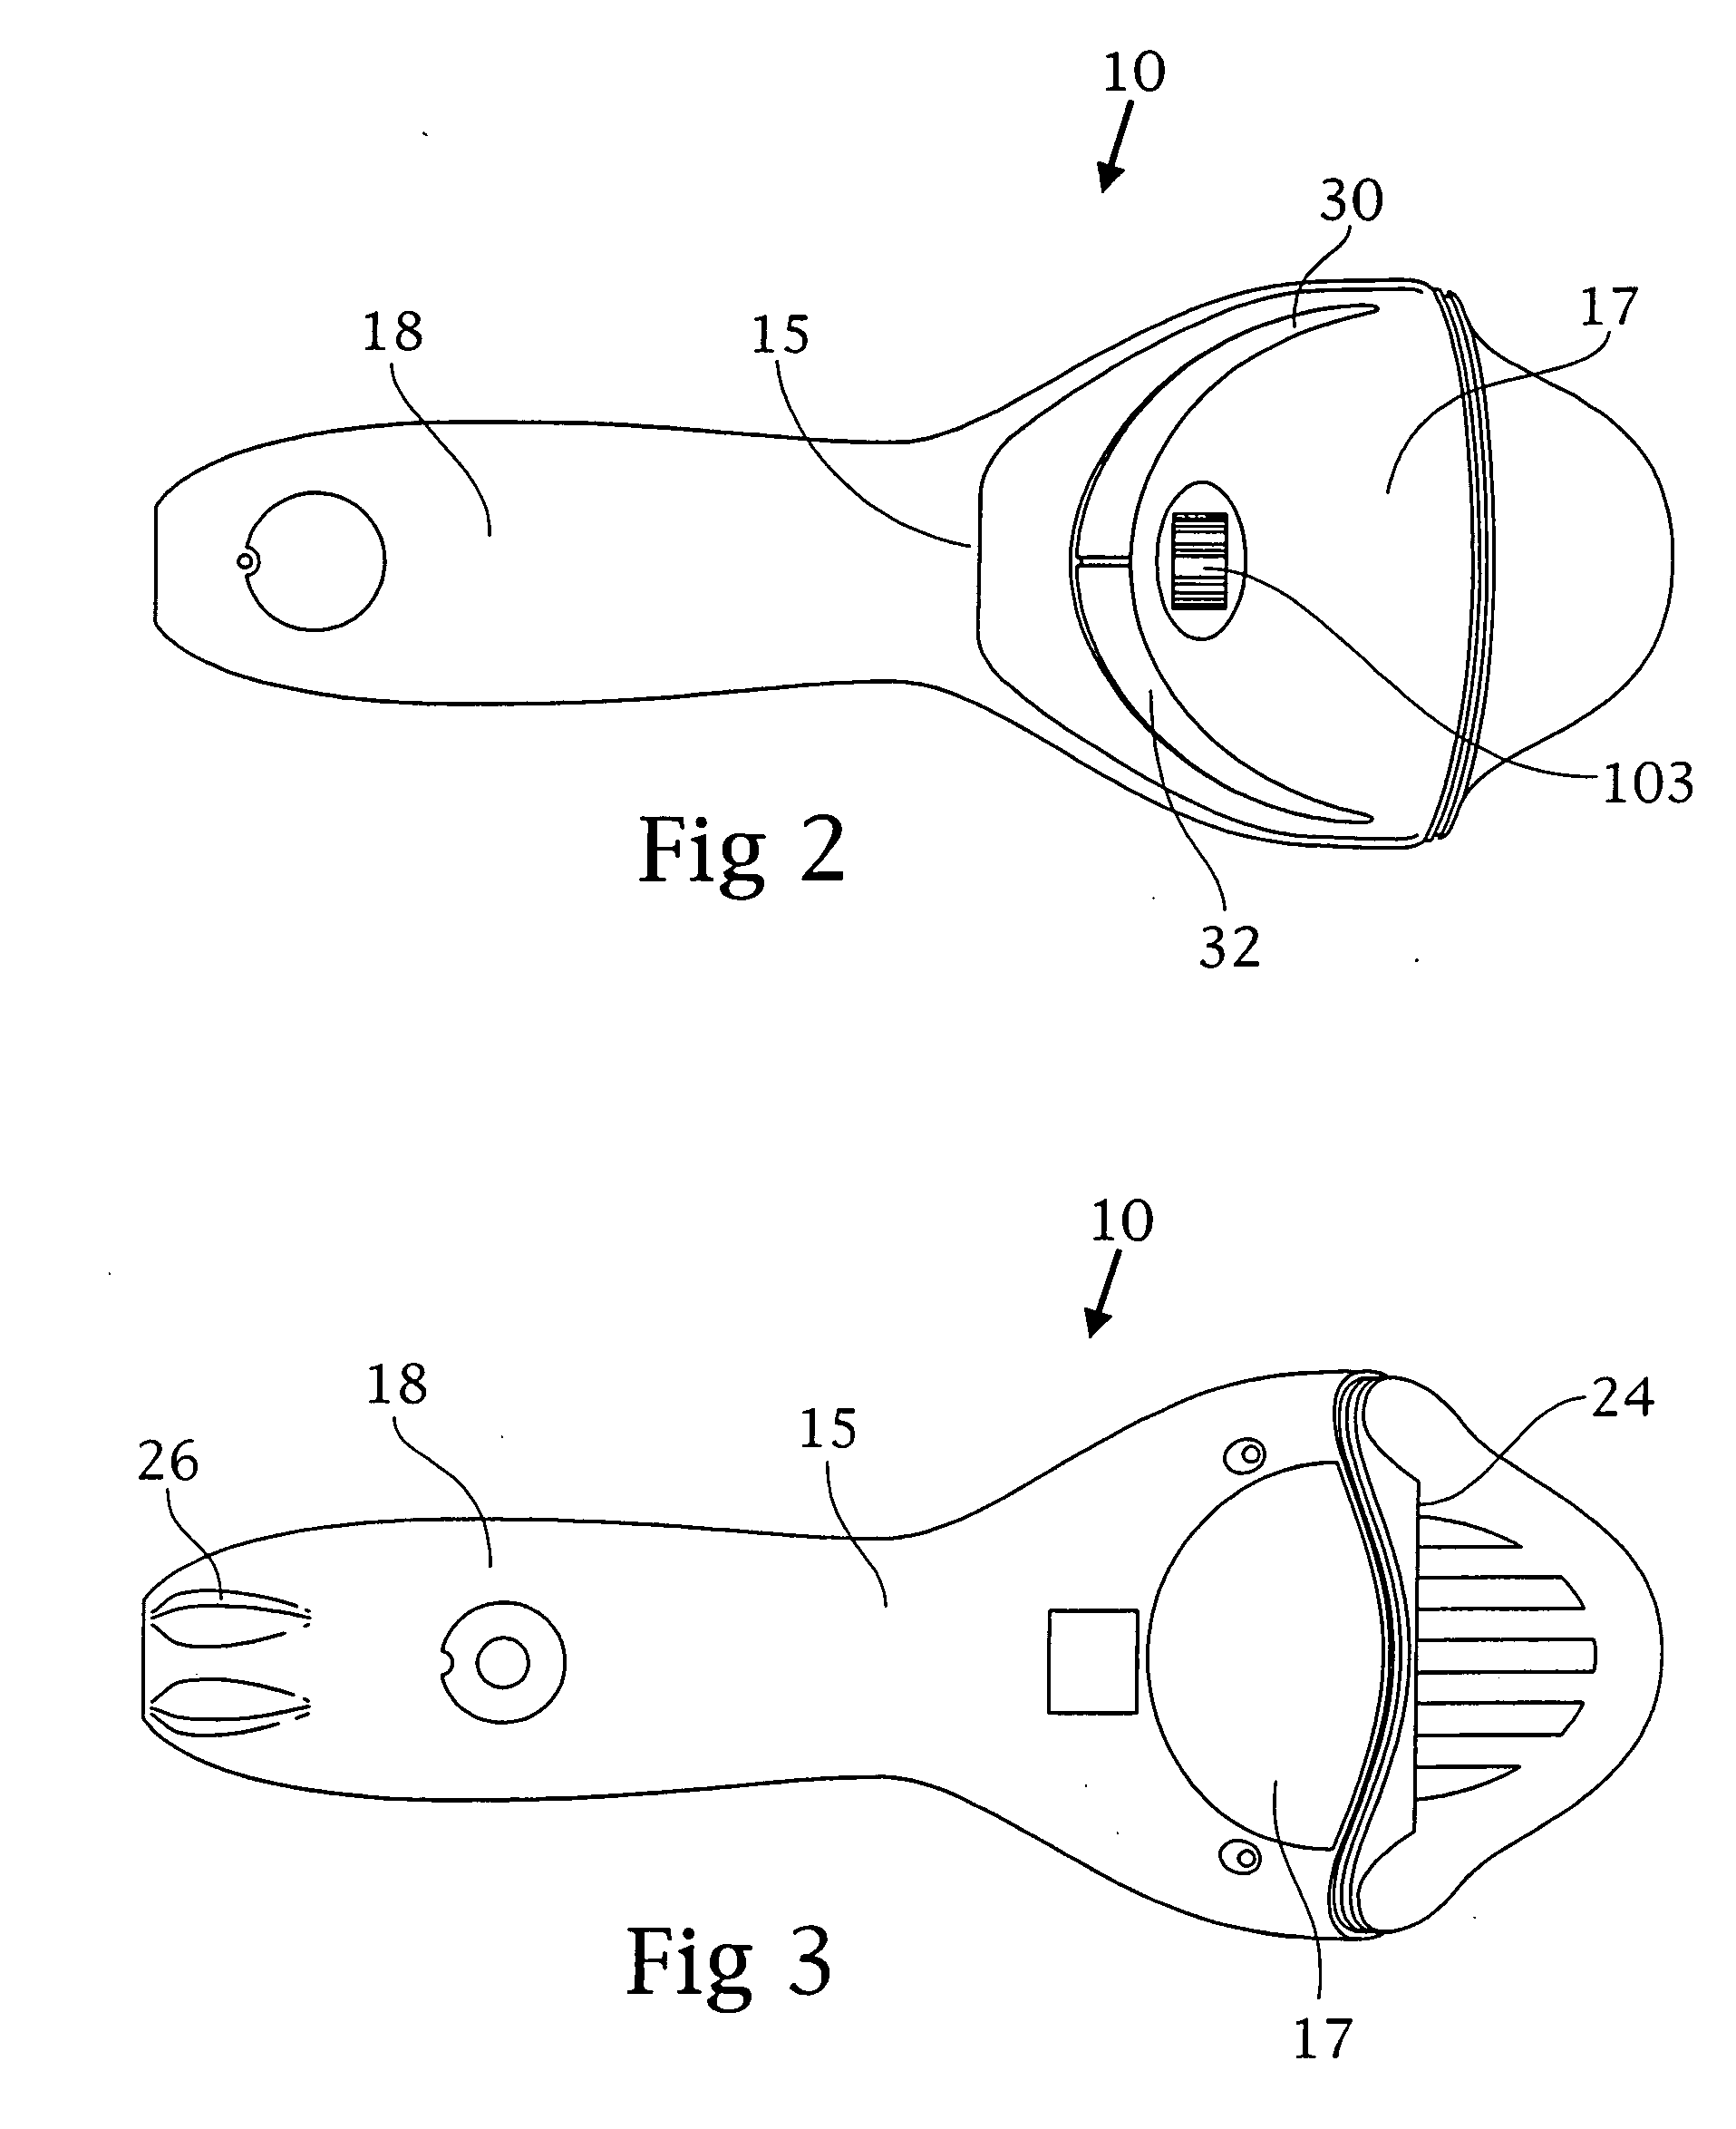 Hand-held compact ergonomic laser scanner with integrated scanner activation or data transmission switch in scanner housing